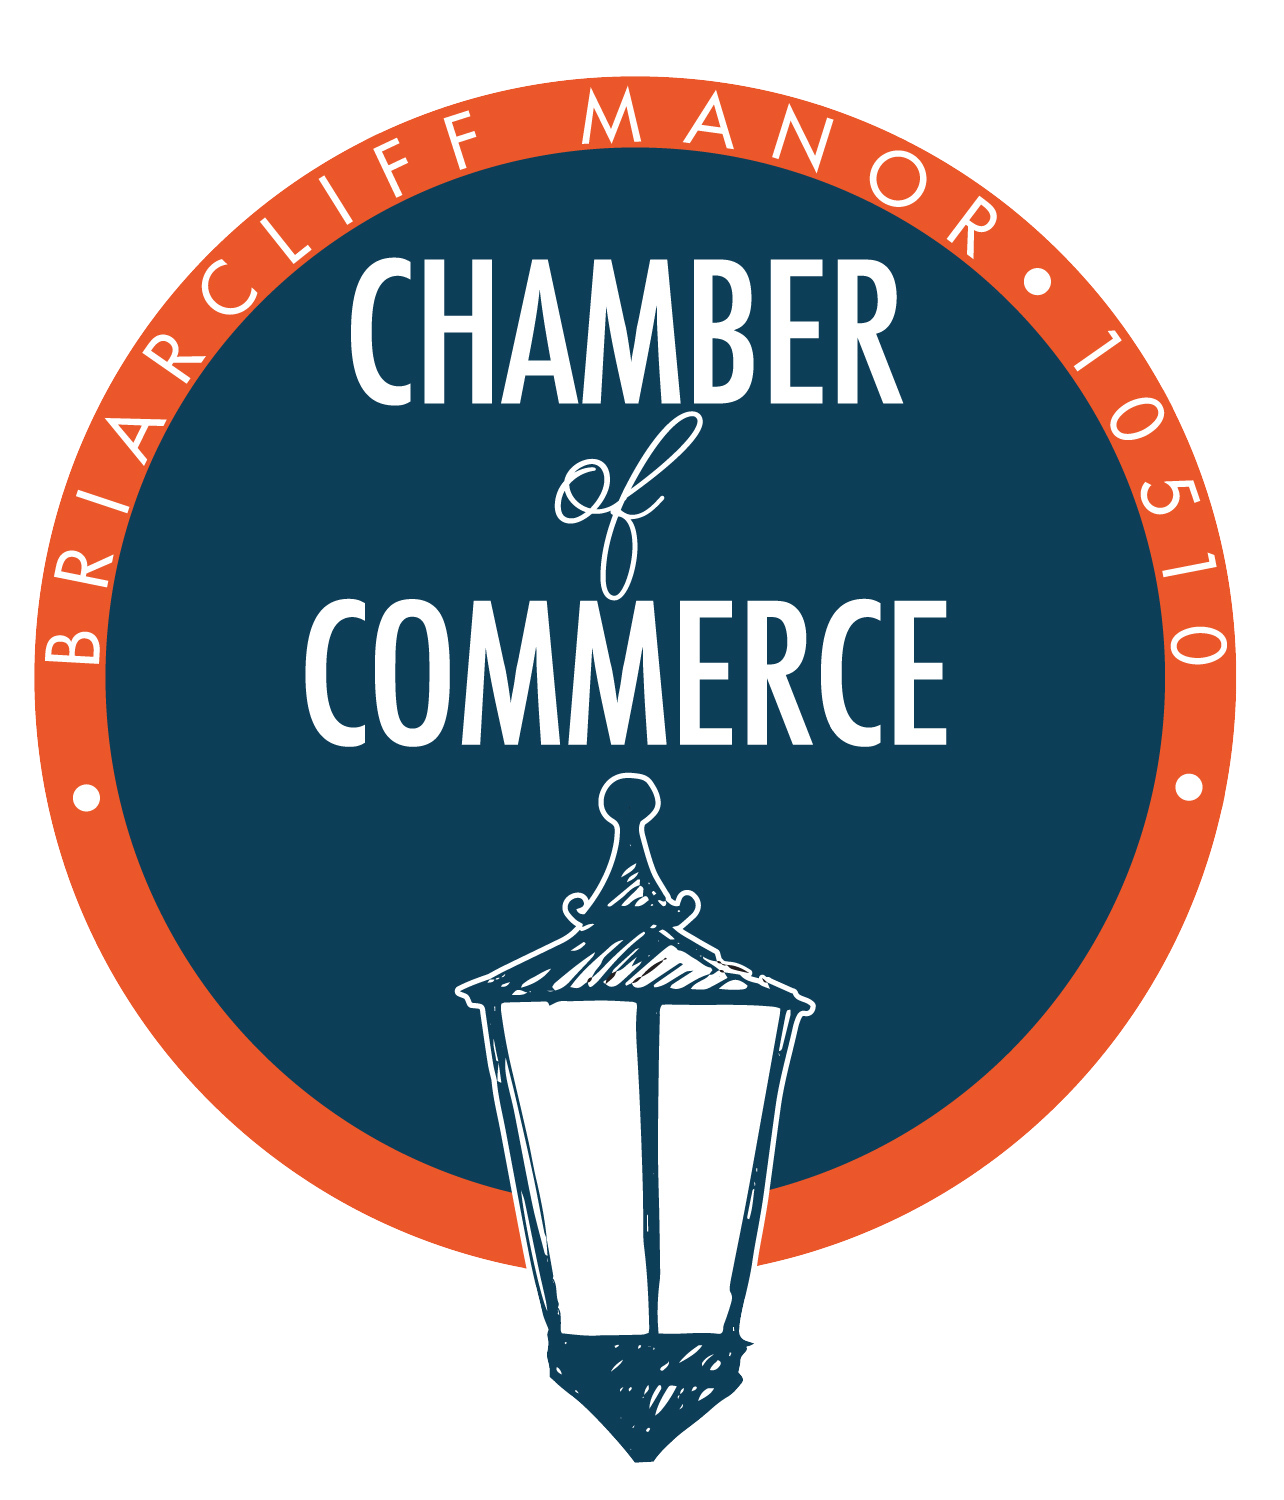 Briarcliff Manor Chamber of Commerce